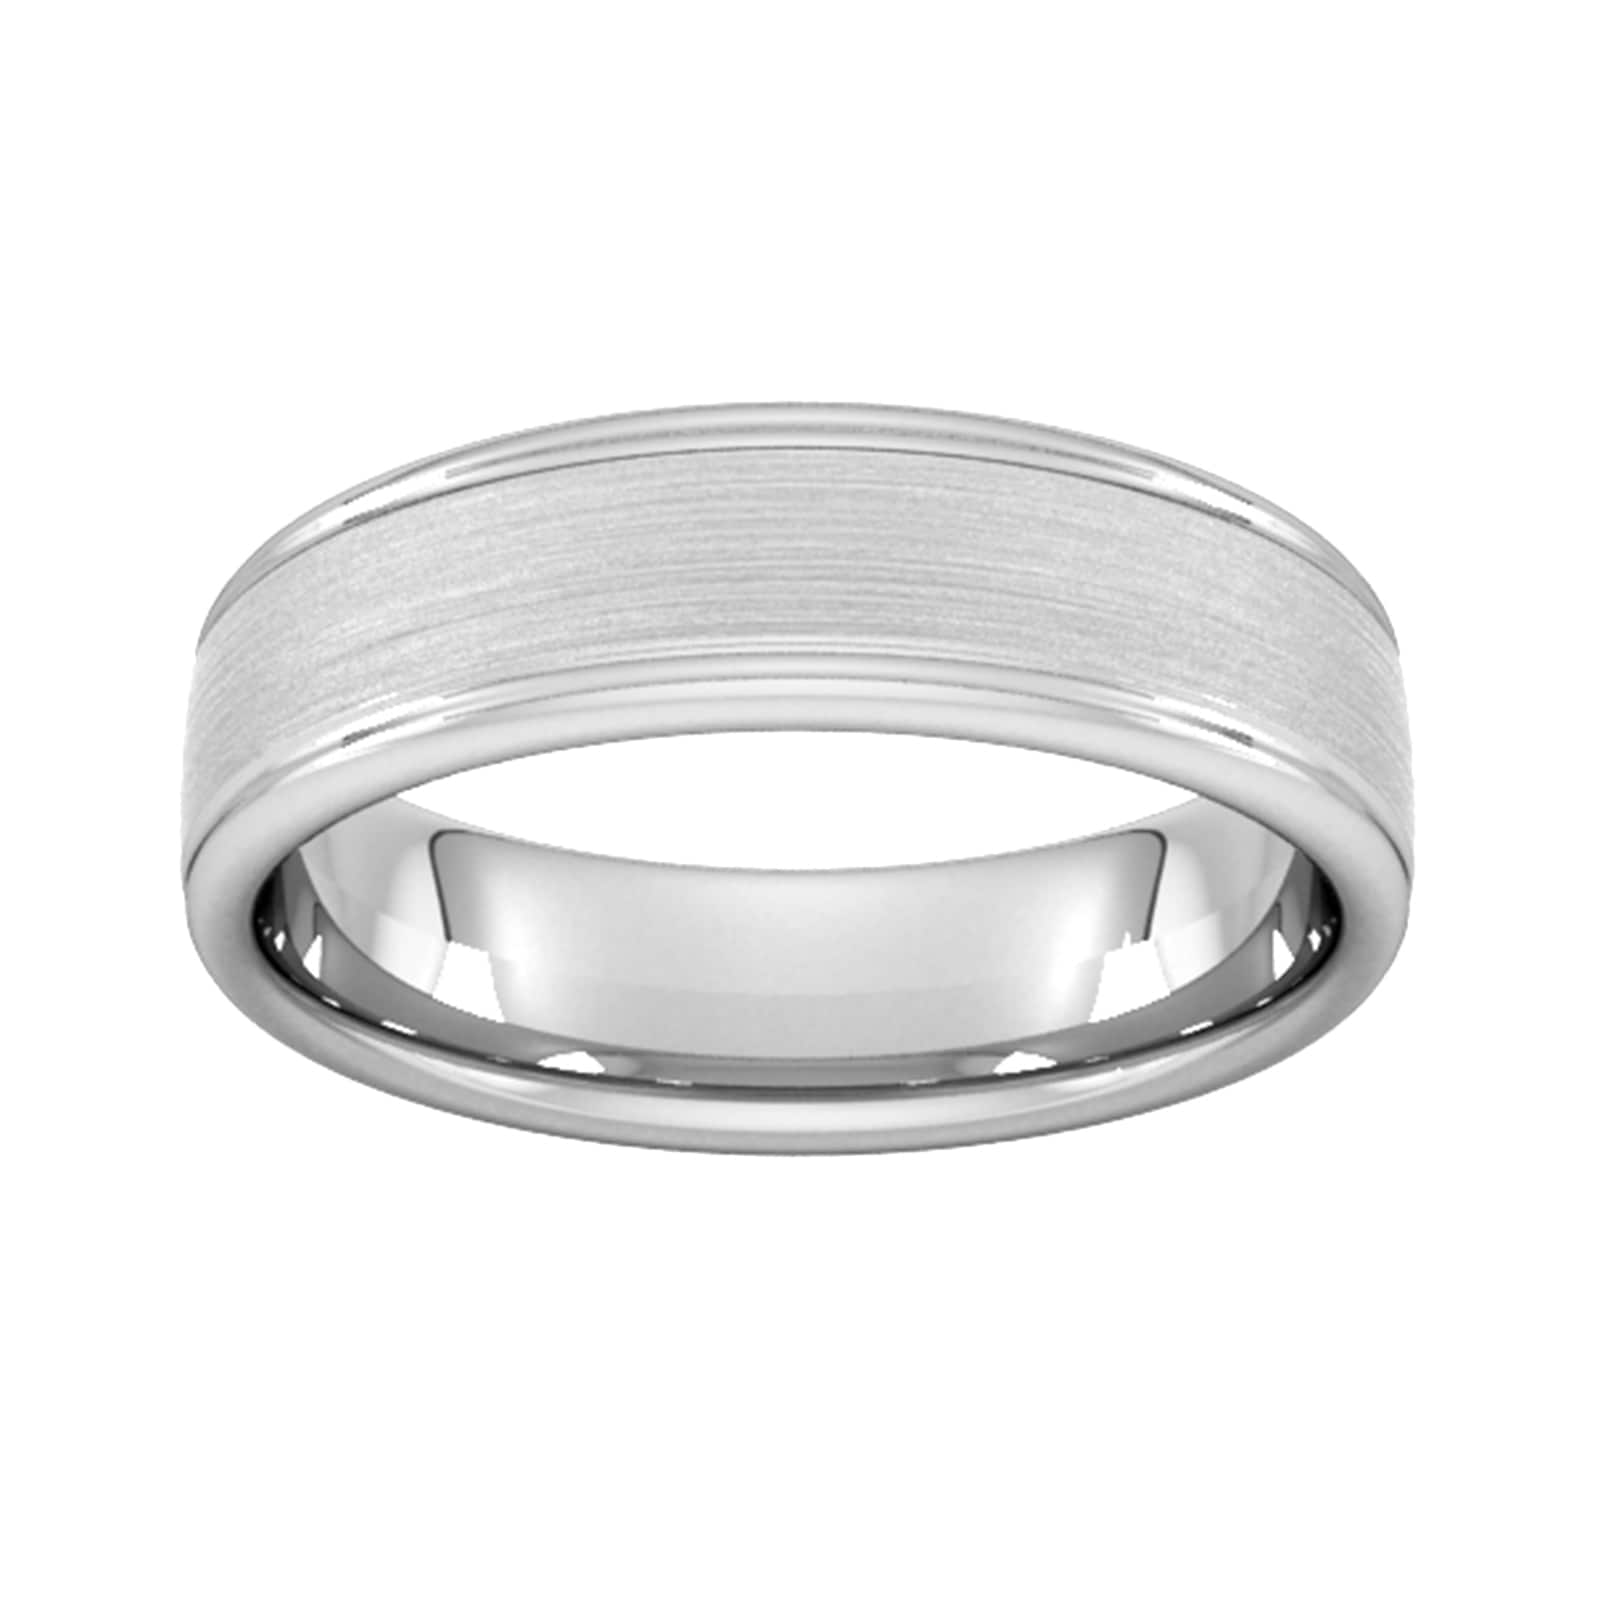 6mm Slight Court Heavy Matt Centre With Grooves Wedding Ring In Platinum - Ring Size W